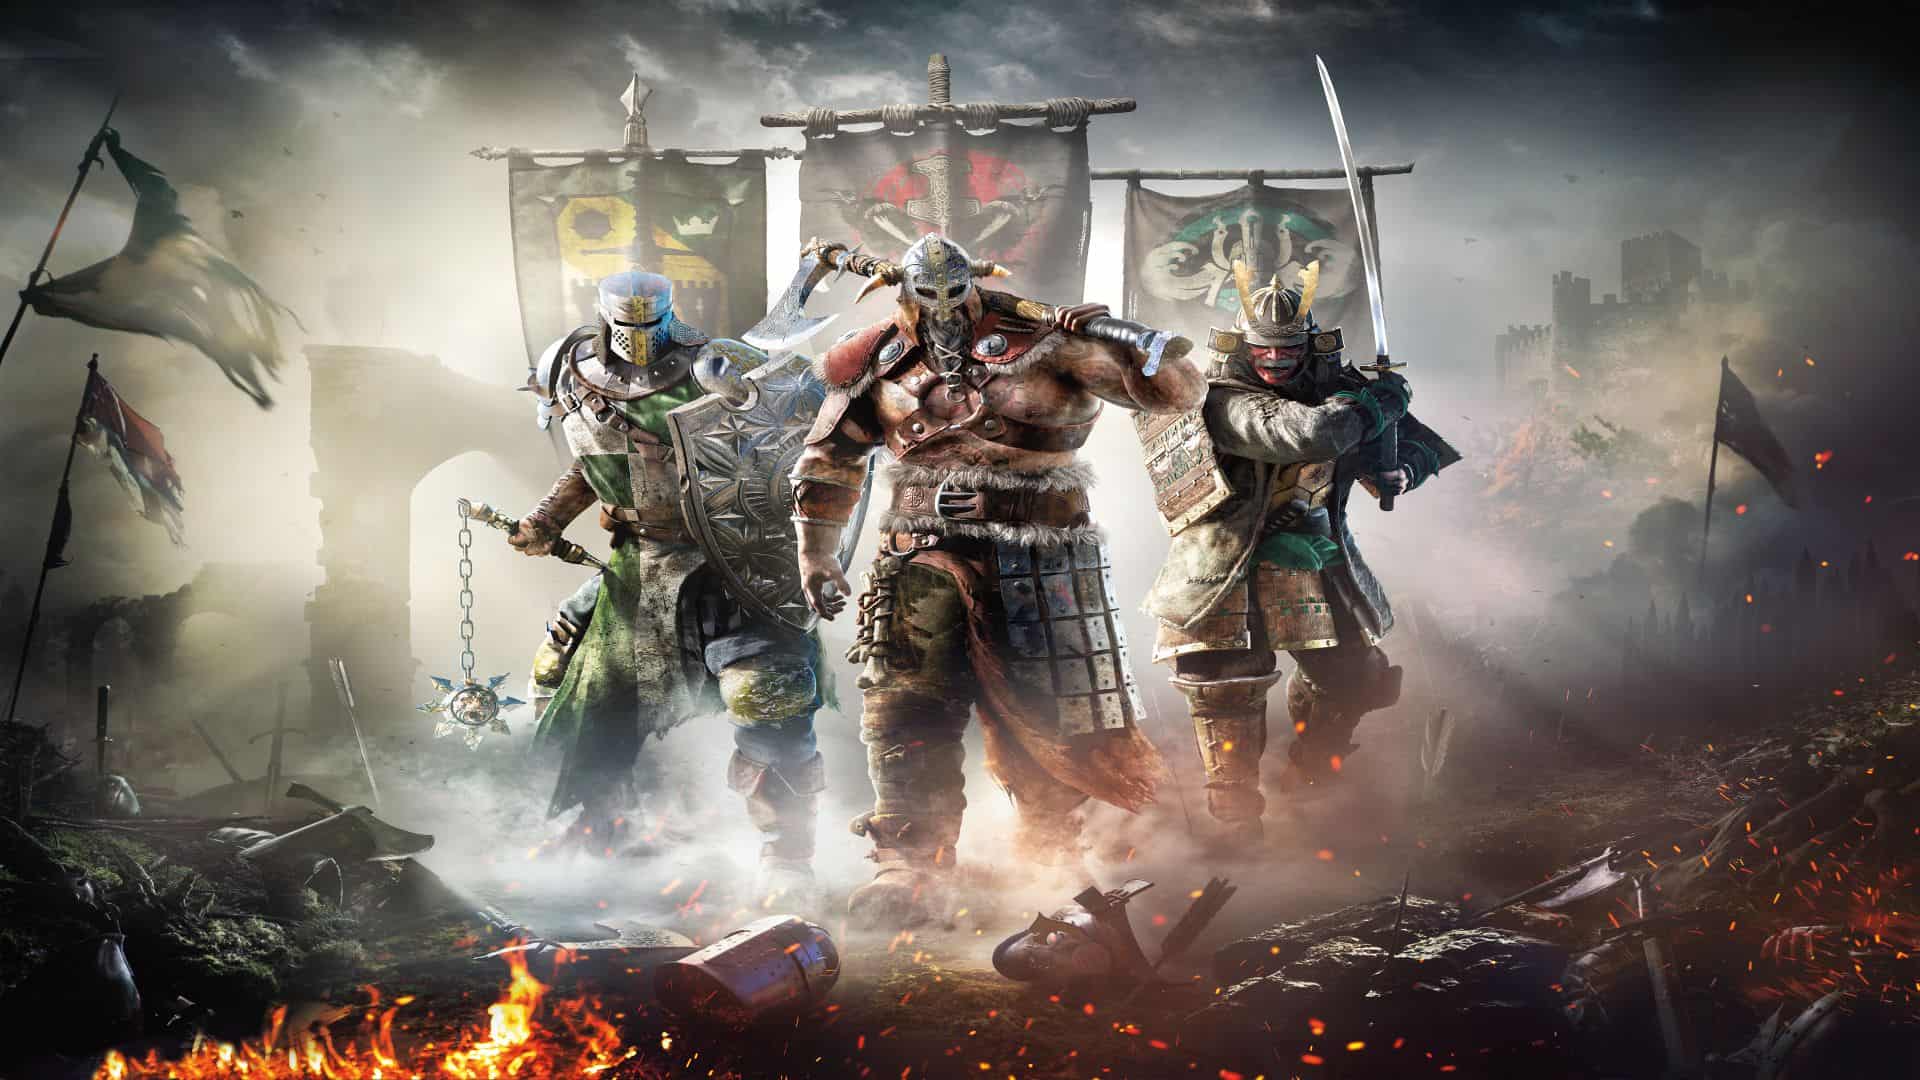 free download best for honor